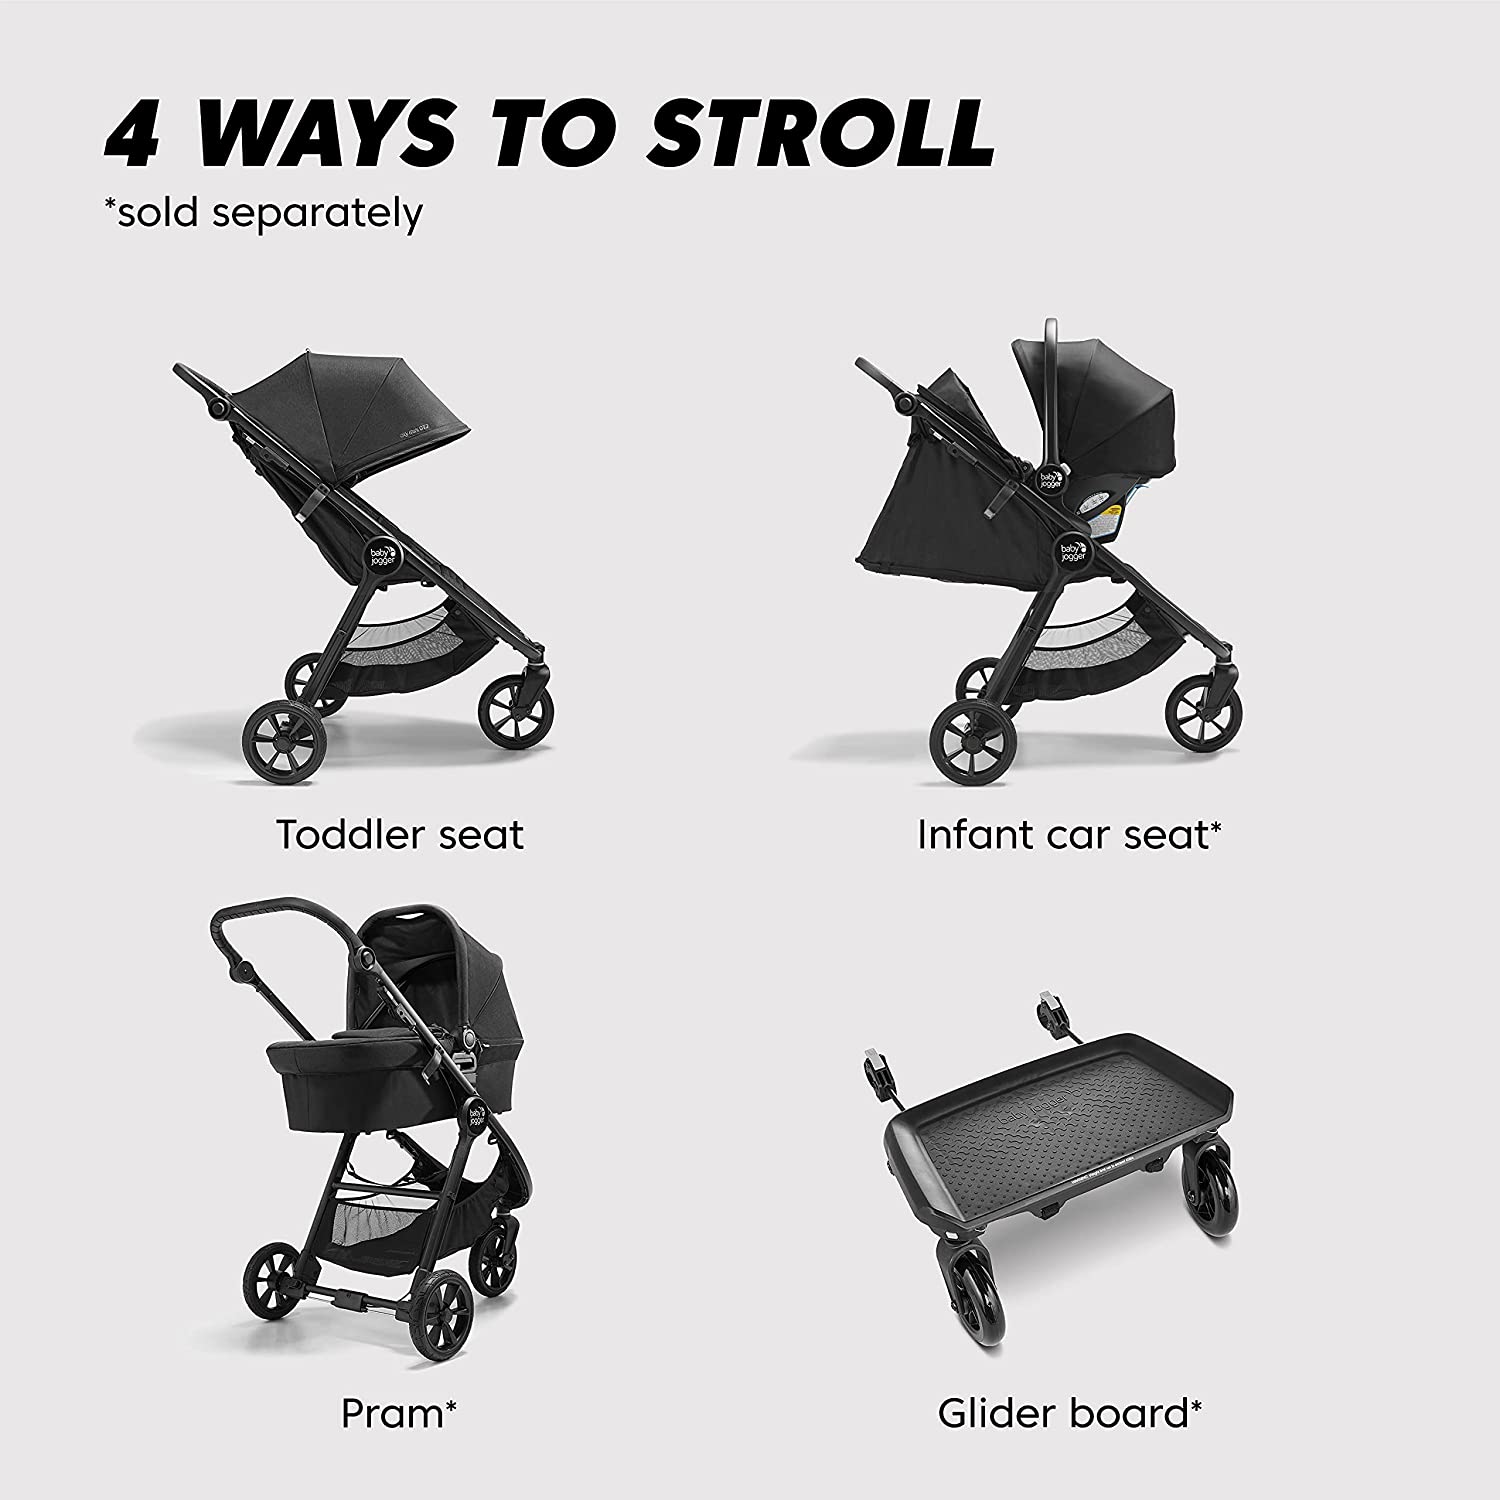 Baby Jogger City Tour 2 Stroller Pitch Black, 4 Wheel Strollers